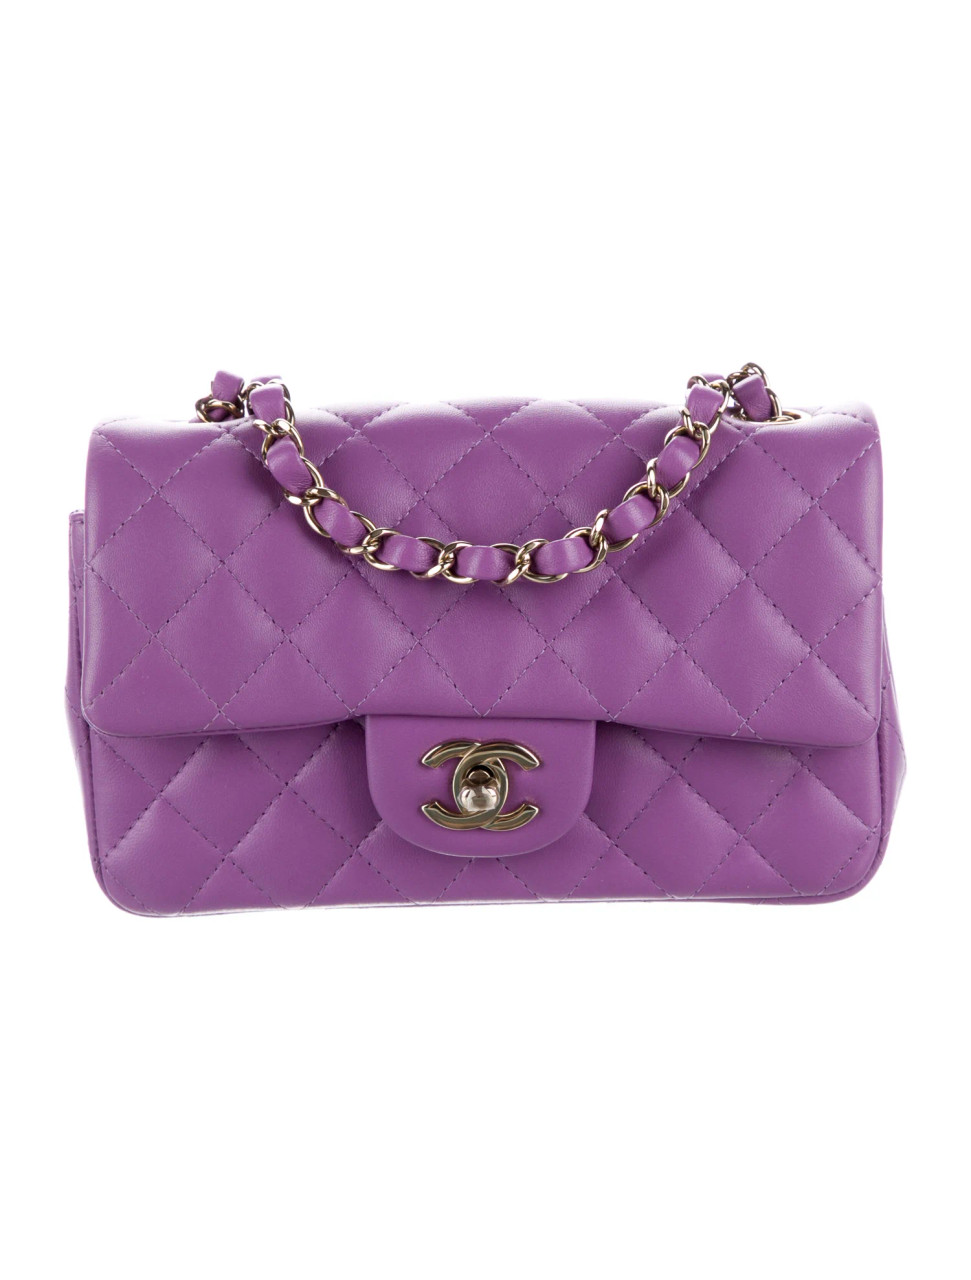 Chanel Quilted Rectangular Mini Flap Bag